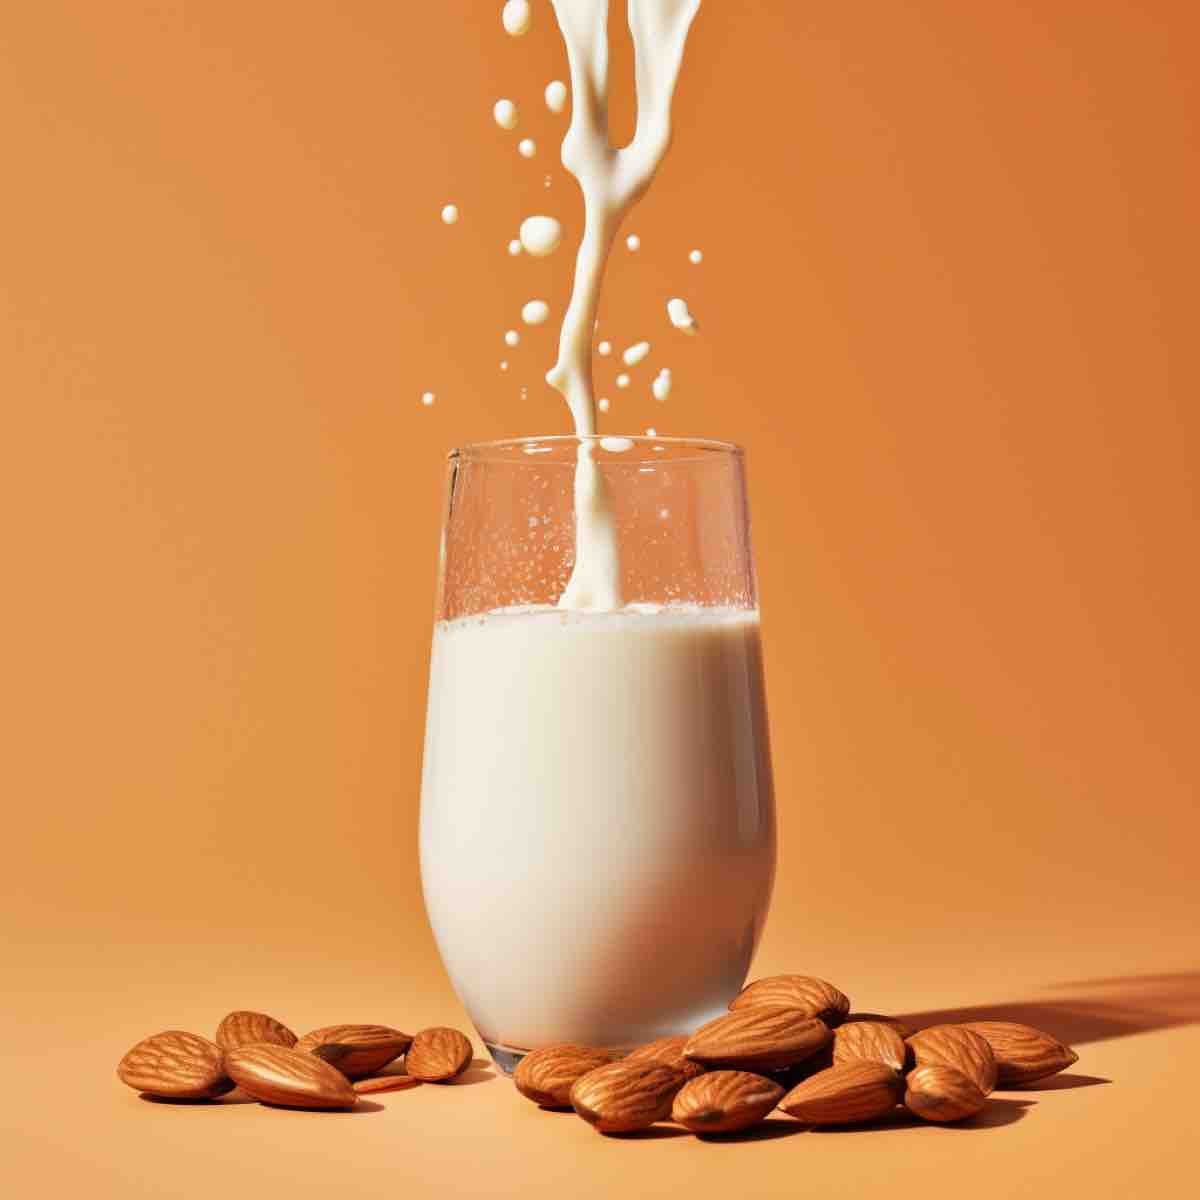 Enhance Your Baking Recipes with Almond Milk as a Dairy Alternative